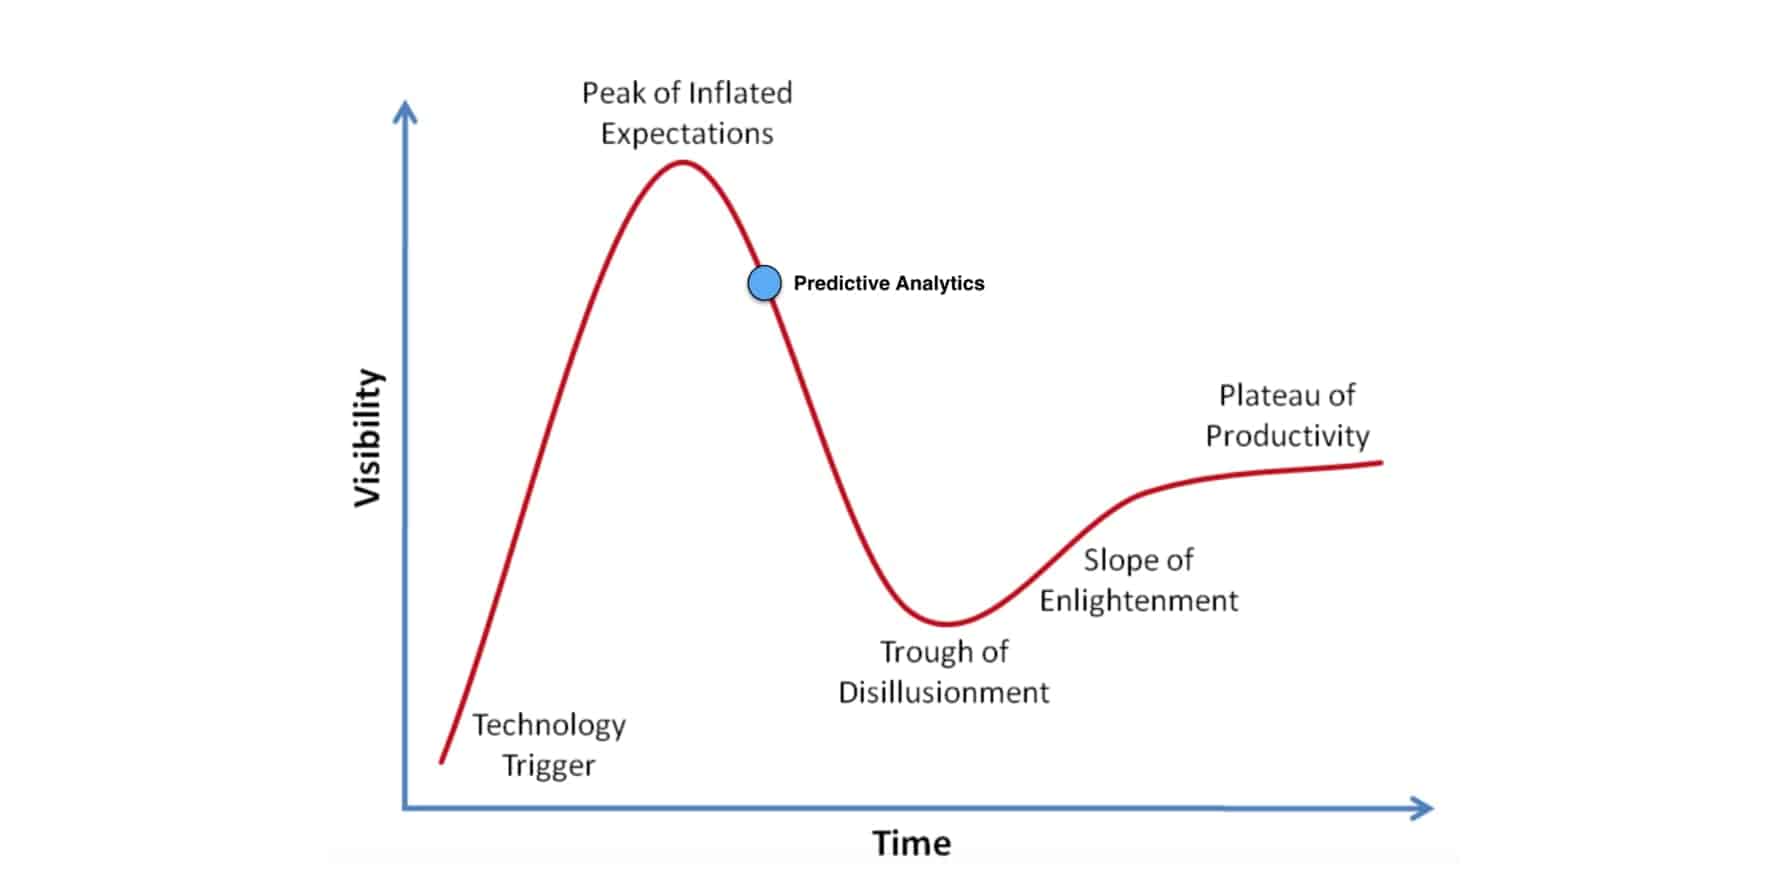 The Gartner Hype Cycle is a commonly used measure of new technology adoption min